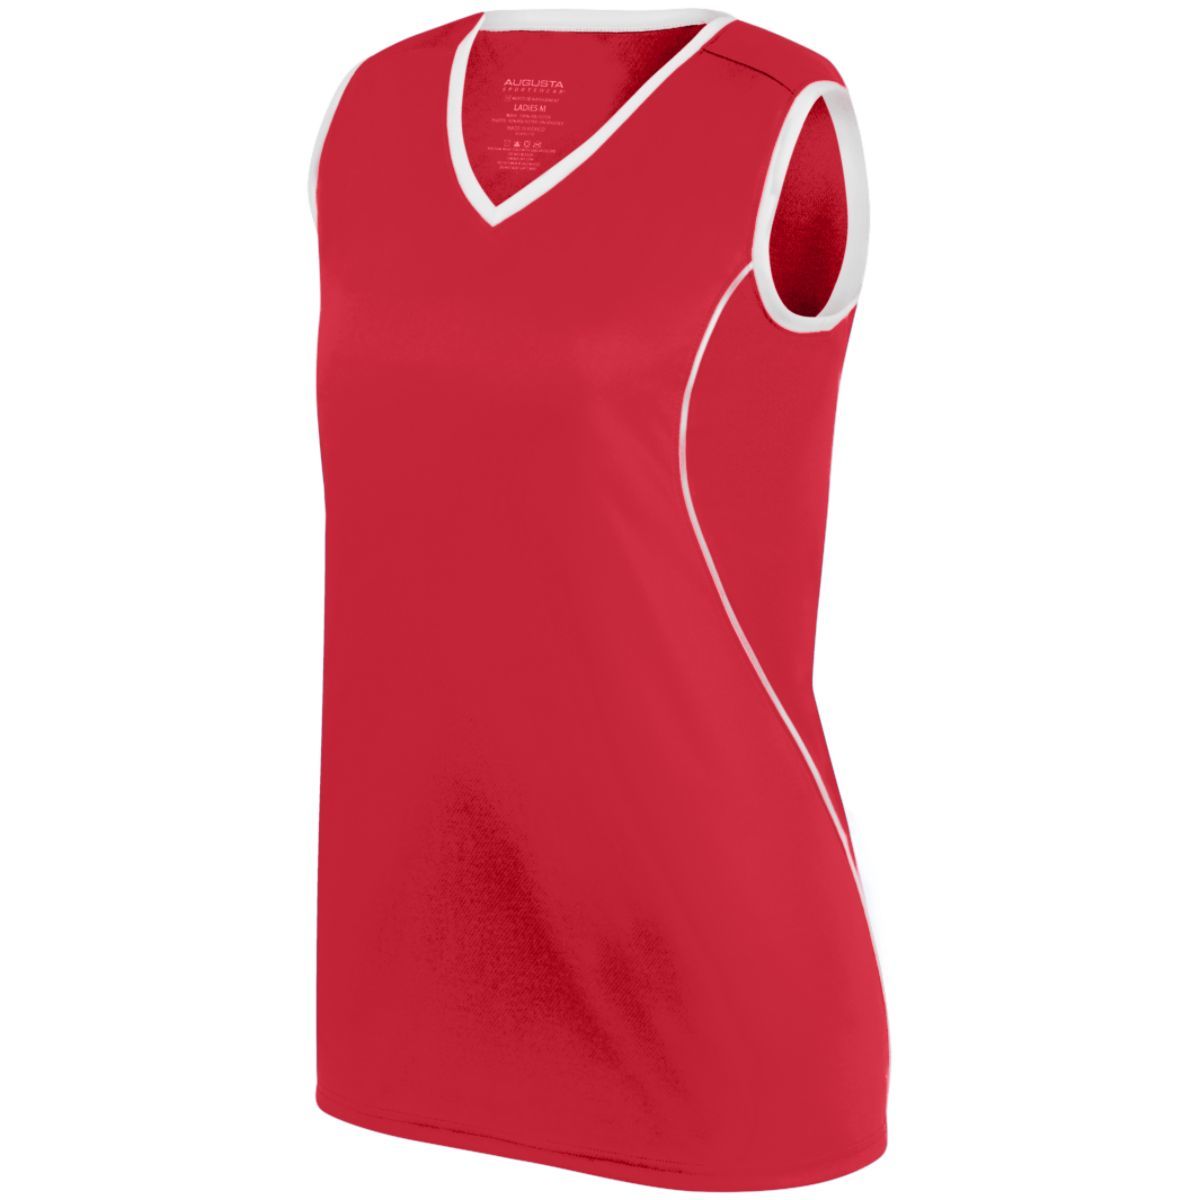 Augusta Sportswear Ladies Firebolt Jersey in Red/White  -Part of the Ladies, Ladies-Jersey, Augusta-Products, Softball, Shirts product lines at KanaleyCreations.com